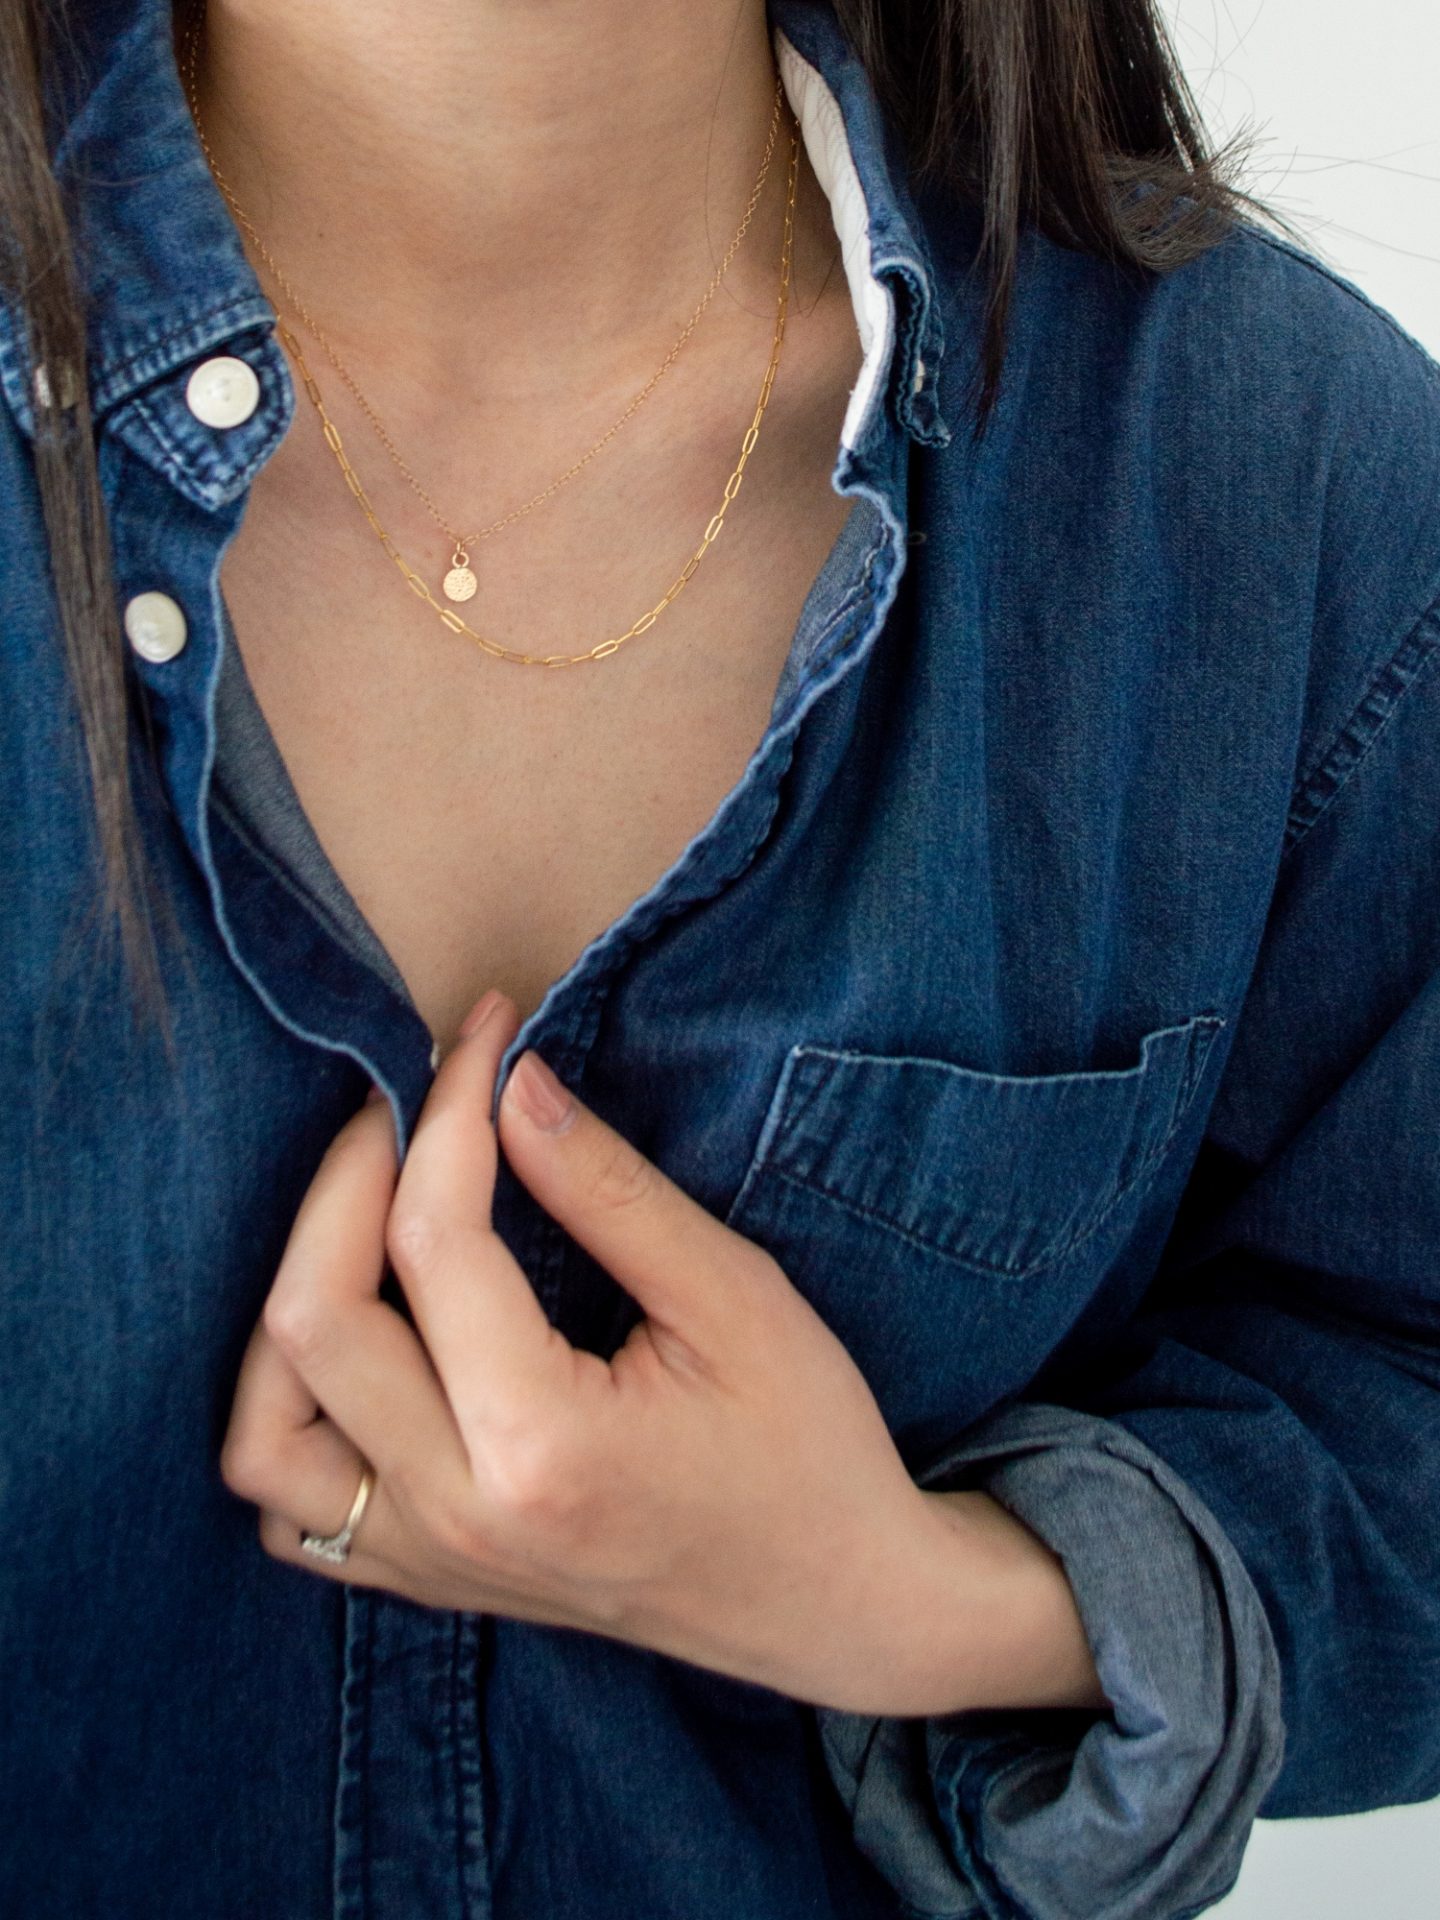 Her Simple Sole - wearing Sheena Marshall Jewelry. Delicate gold jewelry, Carson Necklace, Nora Link Necklace, cotton denim button down shirt